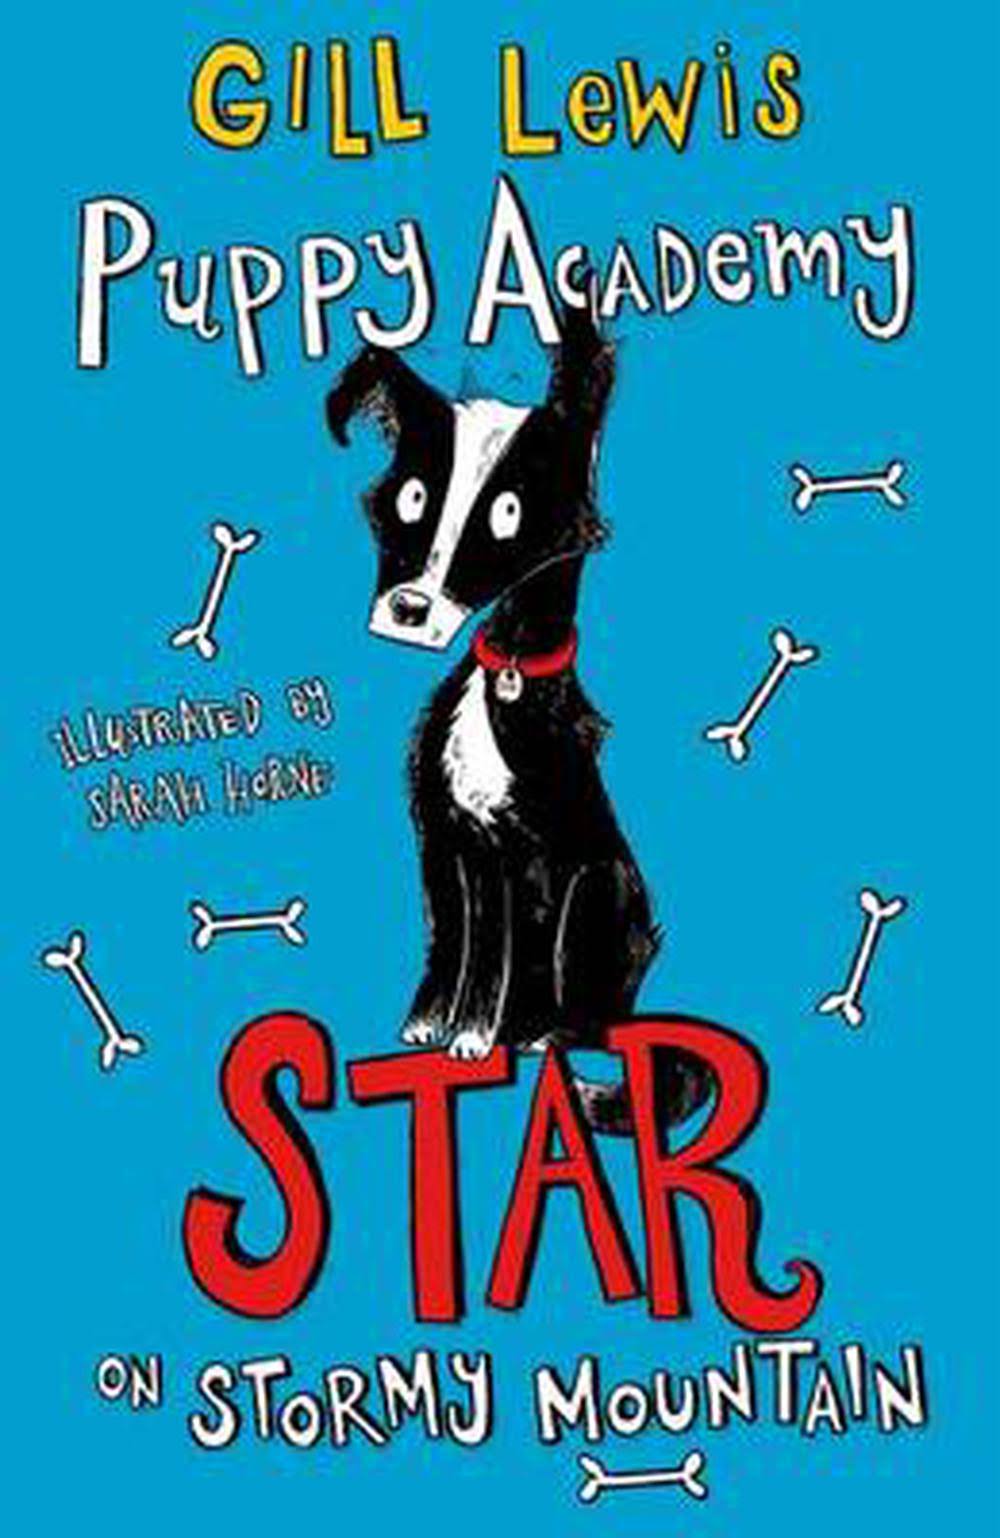 Puppy Academy: Star on Stormy Mountain - Gill Lewis